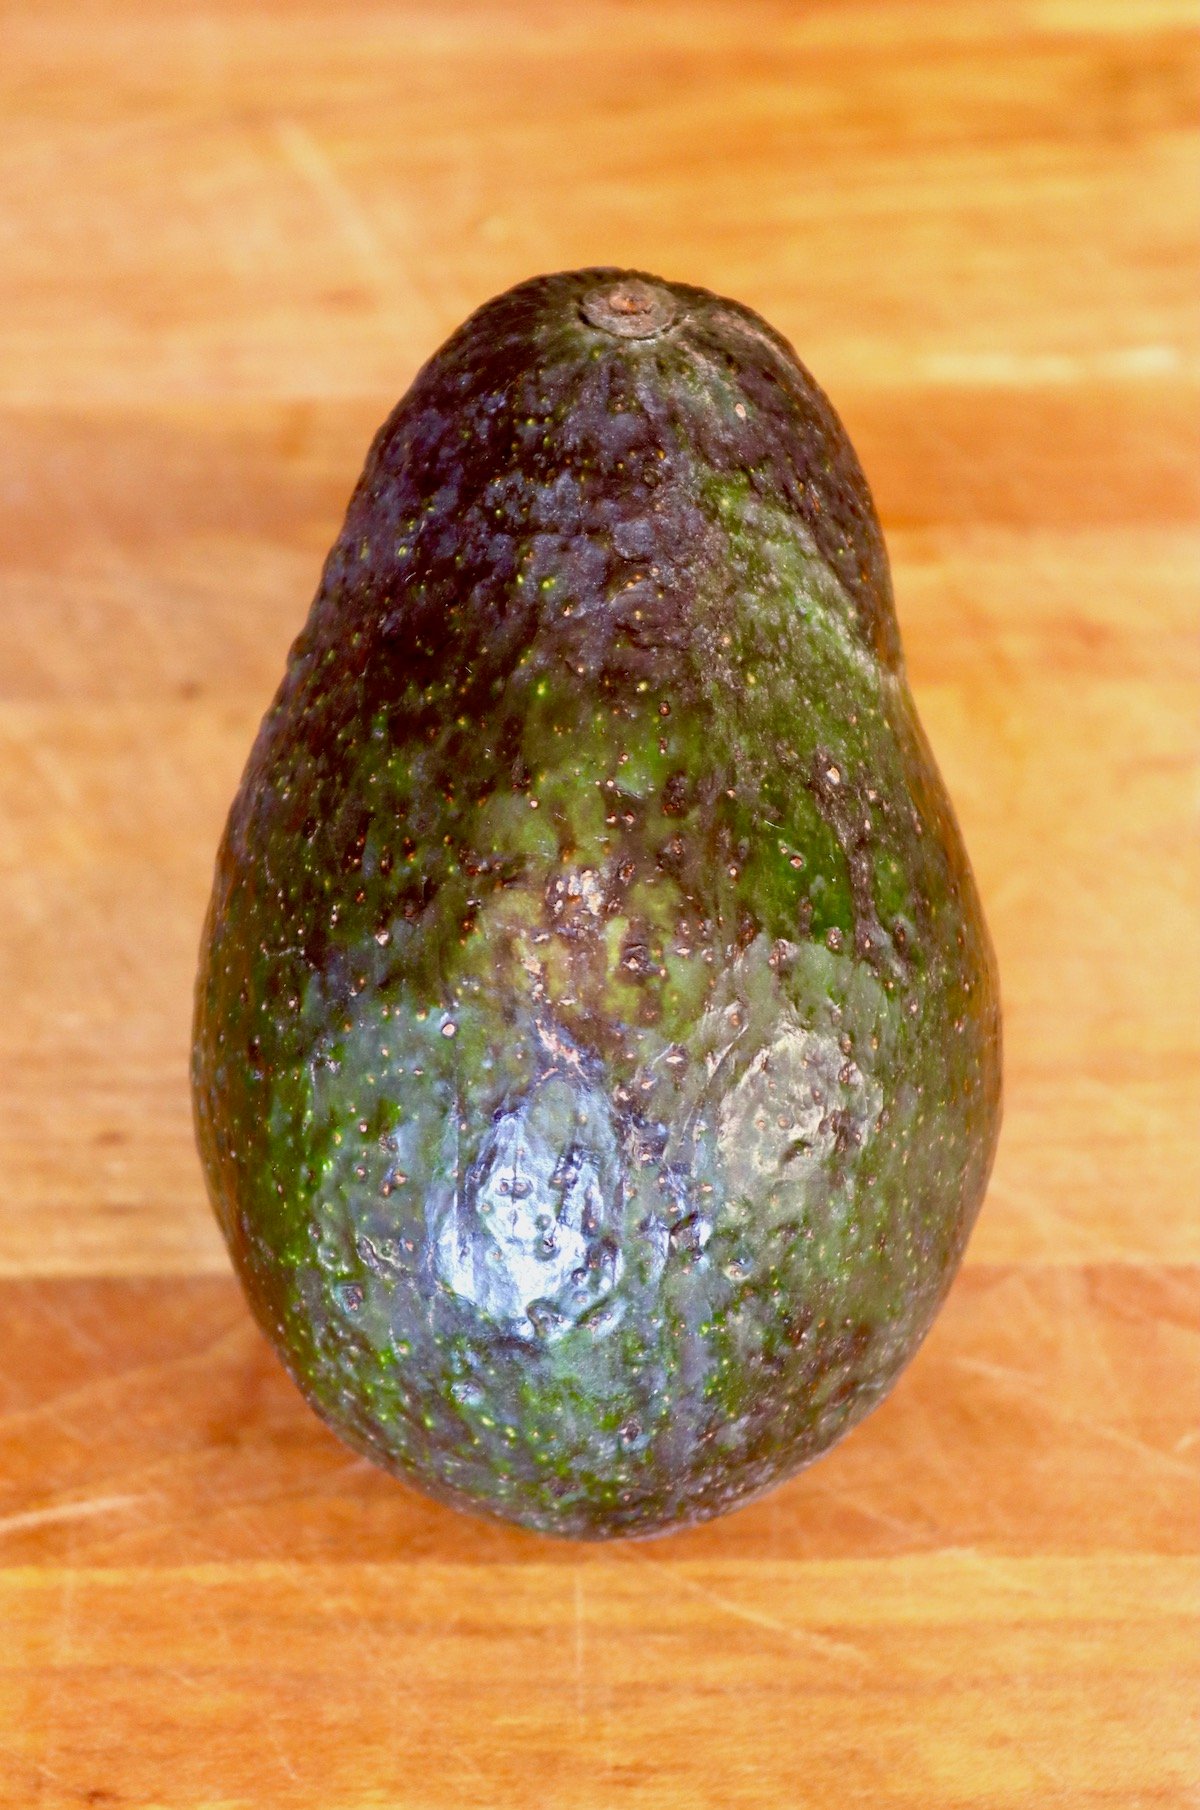 One whole avocado that's a perfect pear shape, on wood cutting board.